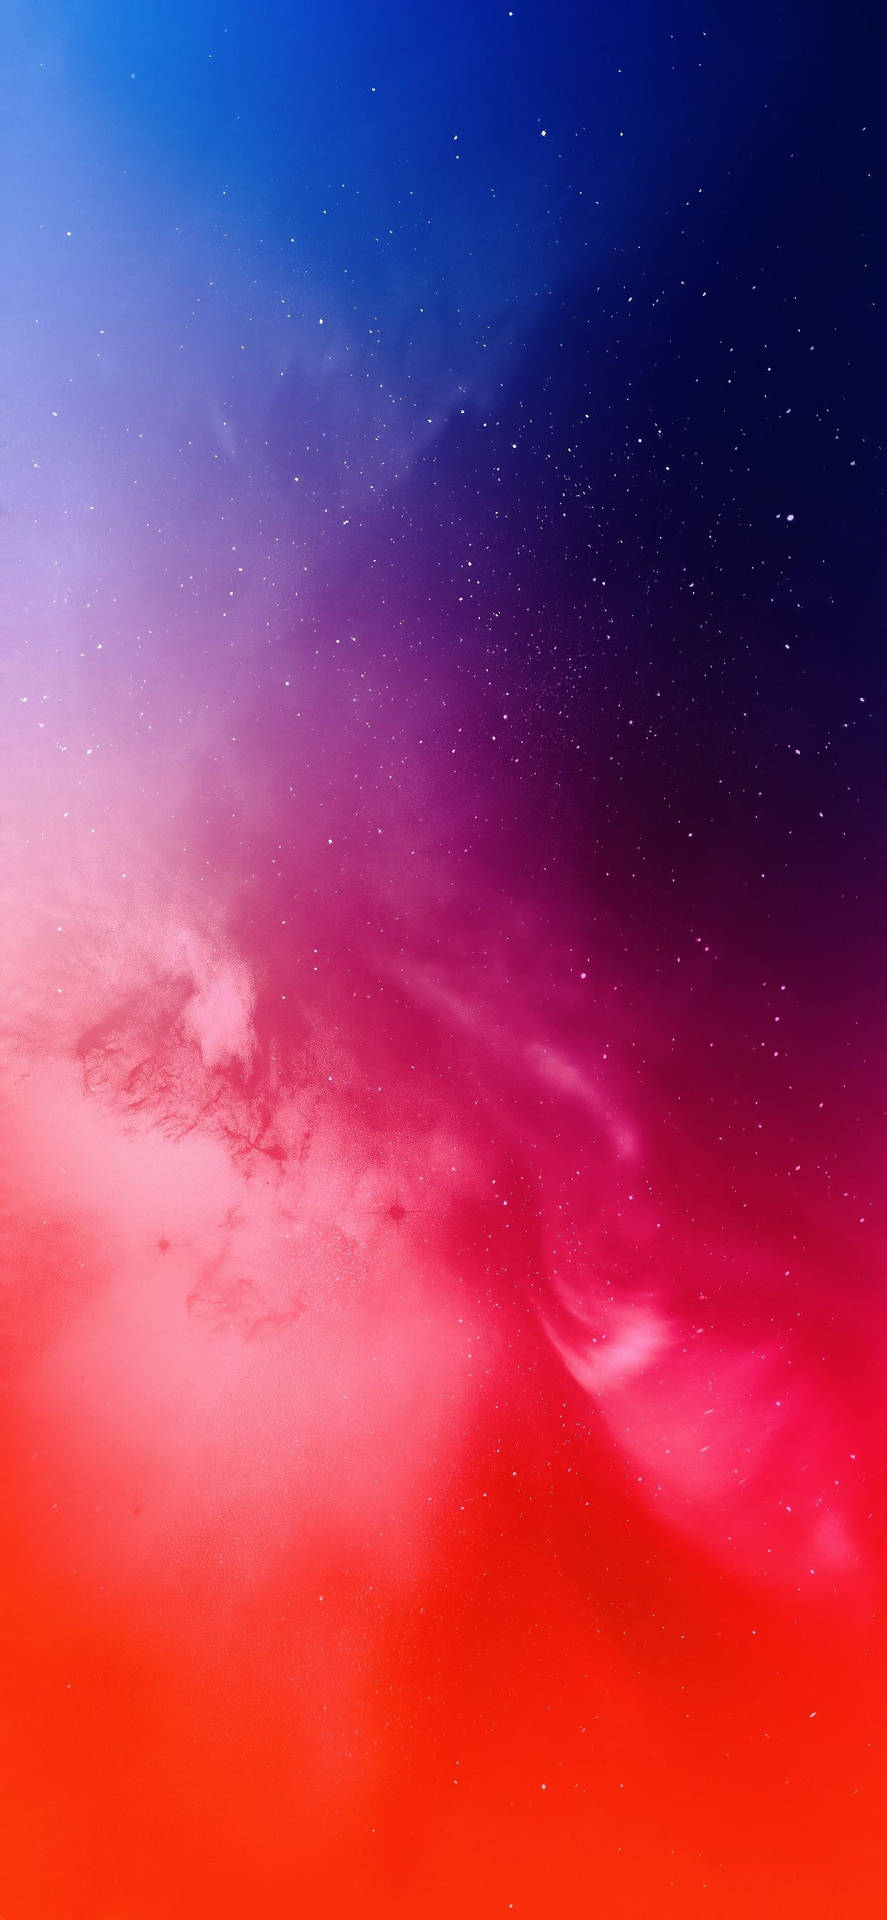 Colorful Space iPhone 11 Pro Max Wallpaper